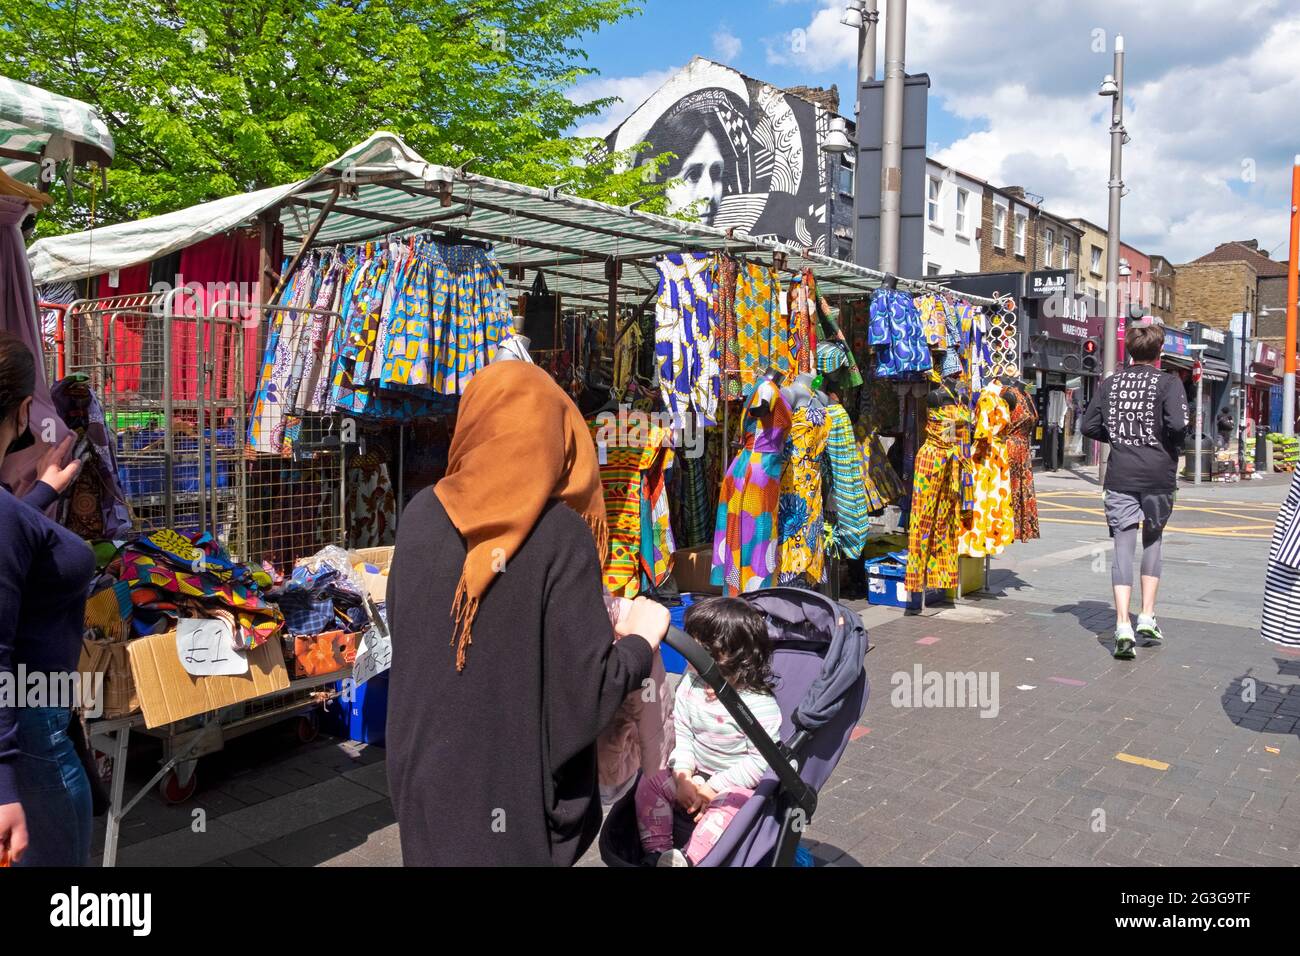 African textiles and clothing for sale on traders market stall people shopping shoppers in Walthamstow High Street London E17 England UK  KATHY DEWITT Stock Photo